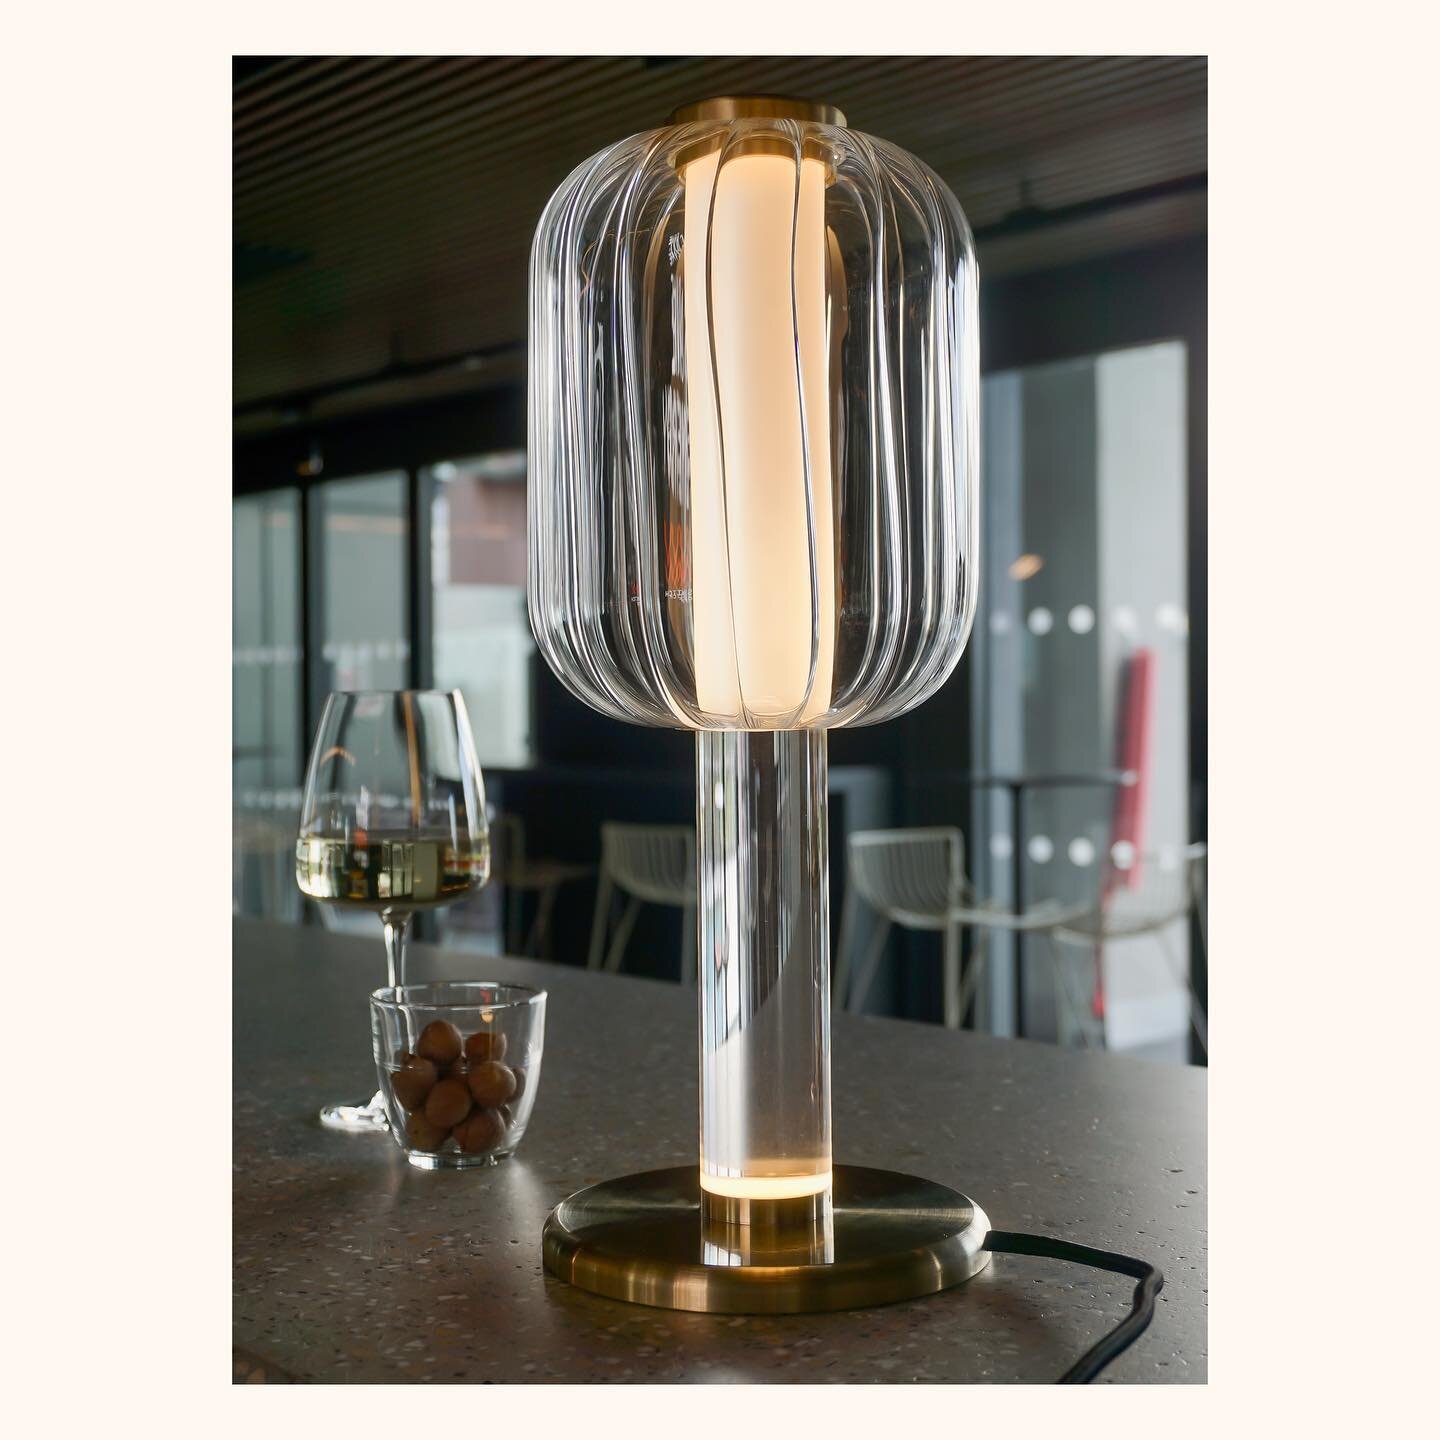 With anticipation building for our upcoming collection, CHRYSALIS, we've taken a moment to reflect on some of our earlier projects, particularly the ALMA Table Lamp in Semi-matted and Matted Finish, which marked our debut in November 2021.

ALMA TL w